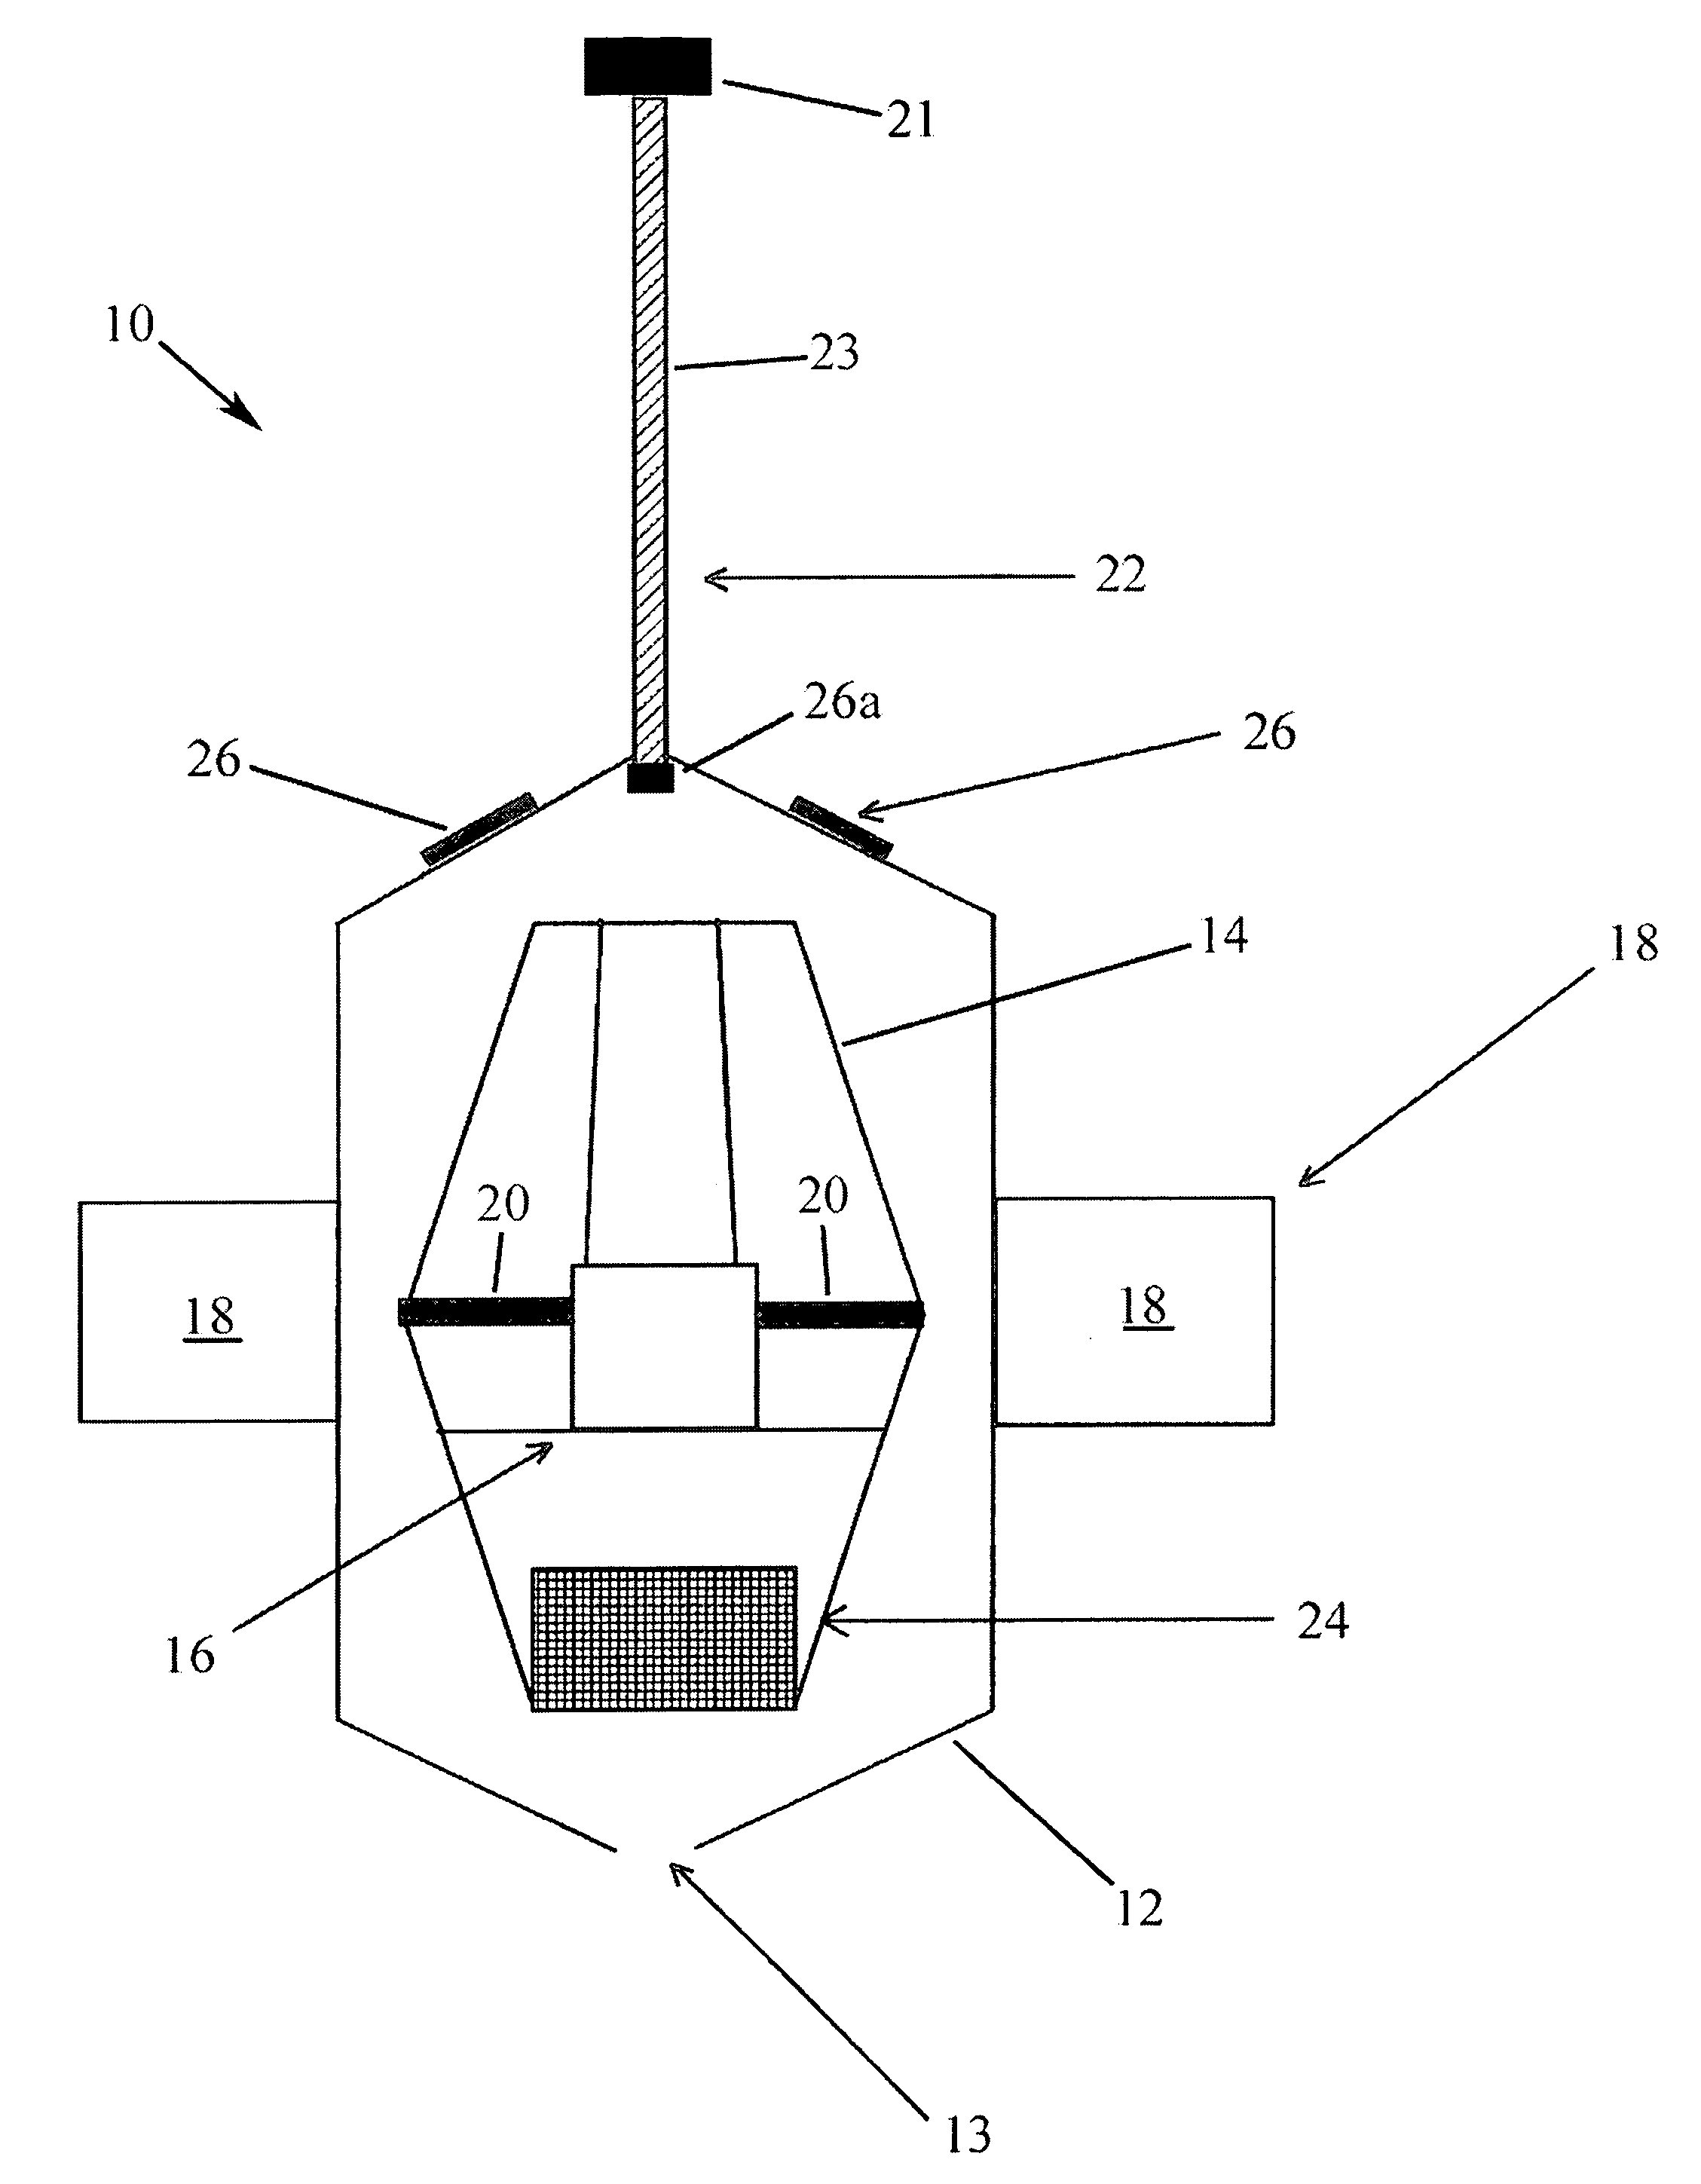 Buoyancy vehicle apparatus to create electrical power